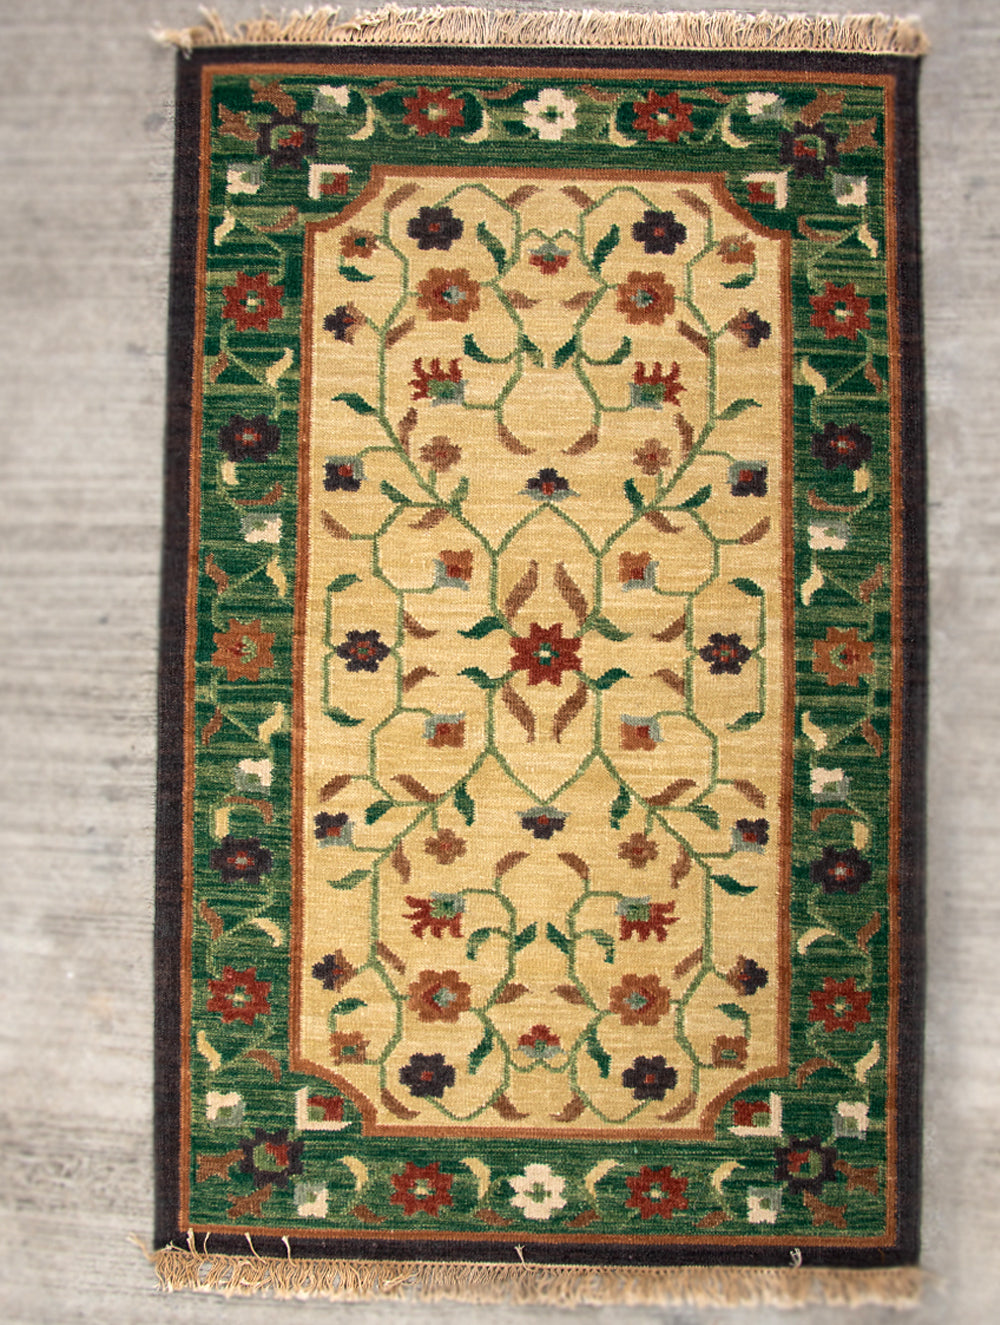 Load image into Gallery viewer, Handwoven Kilim Rug (8 x 5 ft) - Persian Floral - The India Craft House 